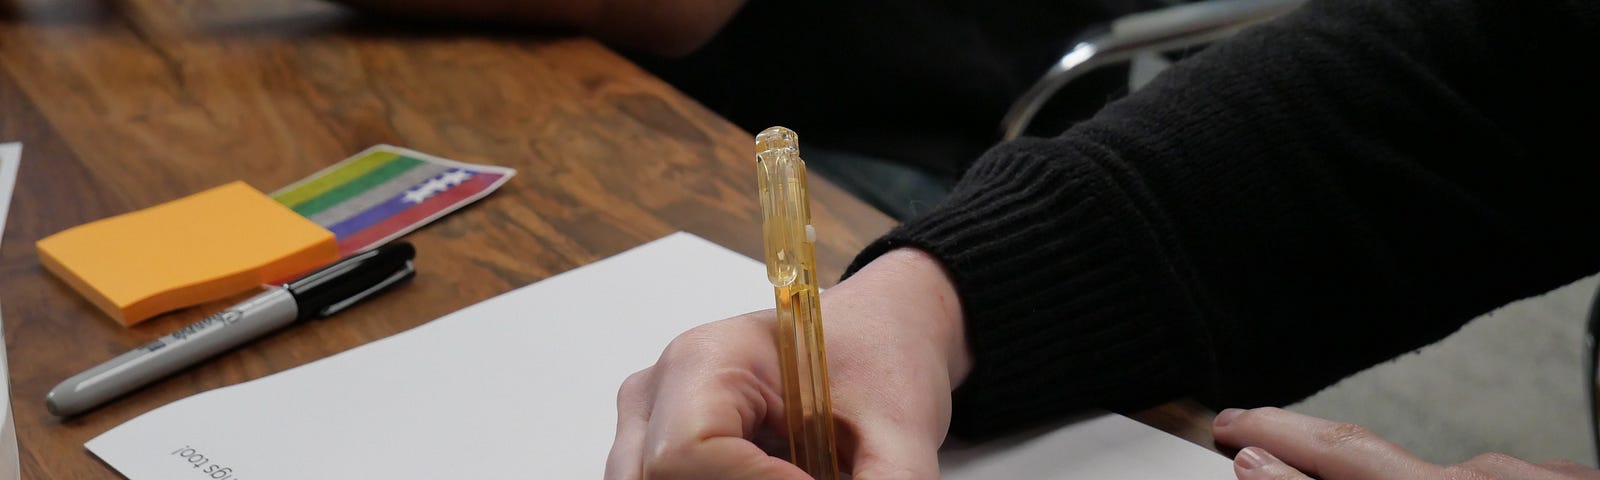 Image of a participant in a black long-sleeved shirt filling out a worksheet with an orange pen.